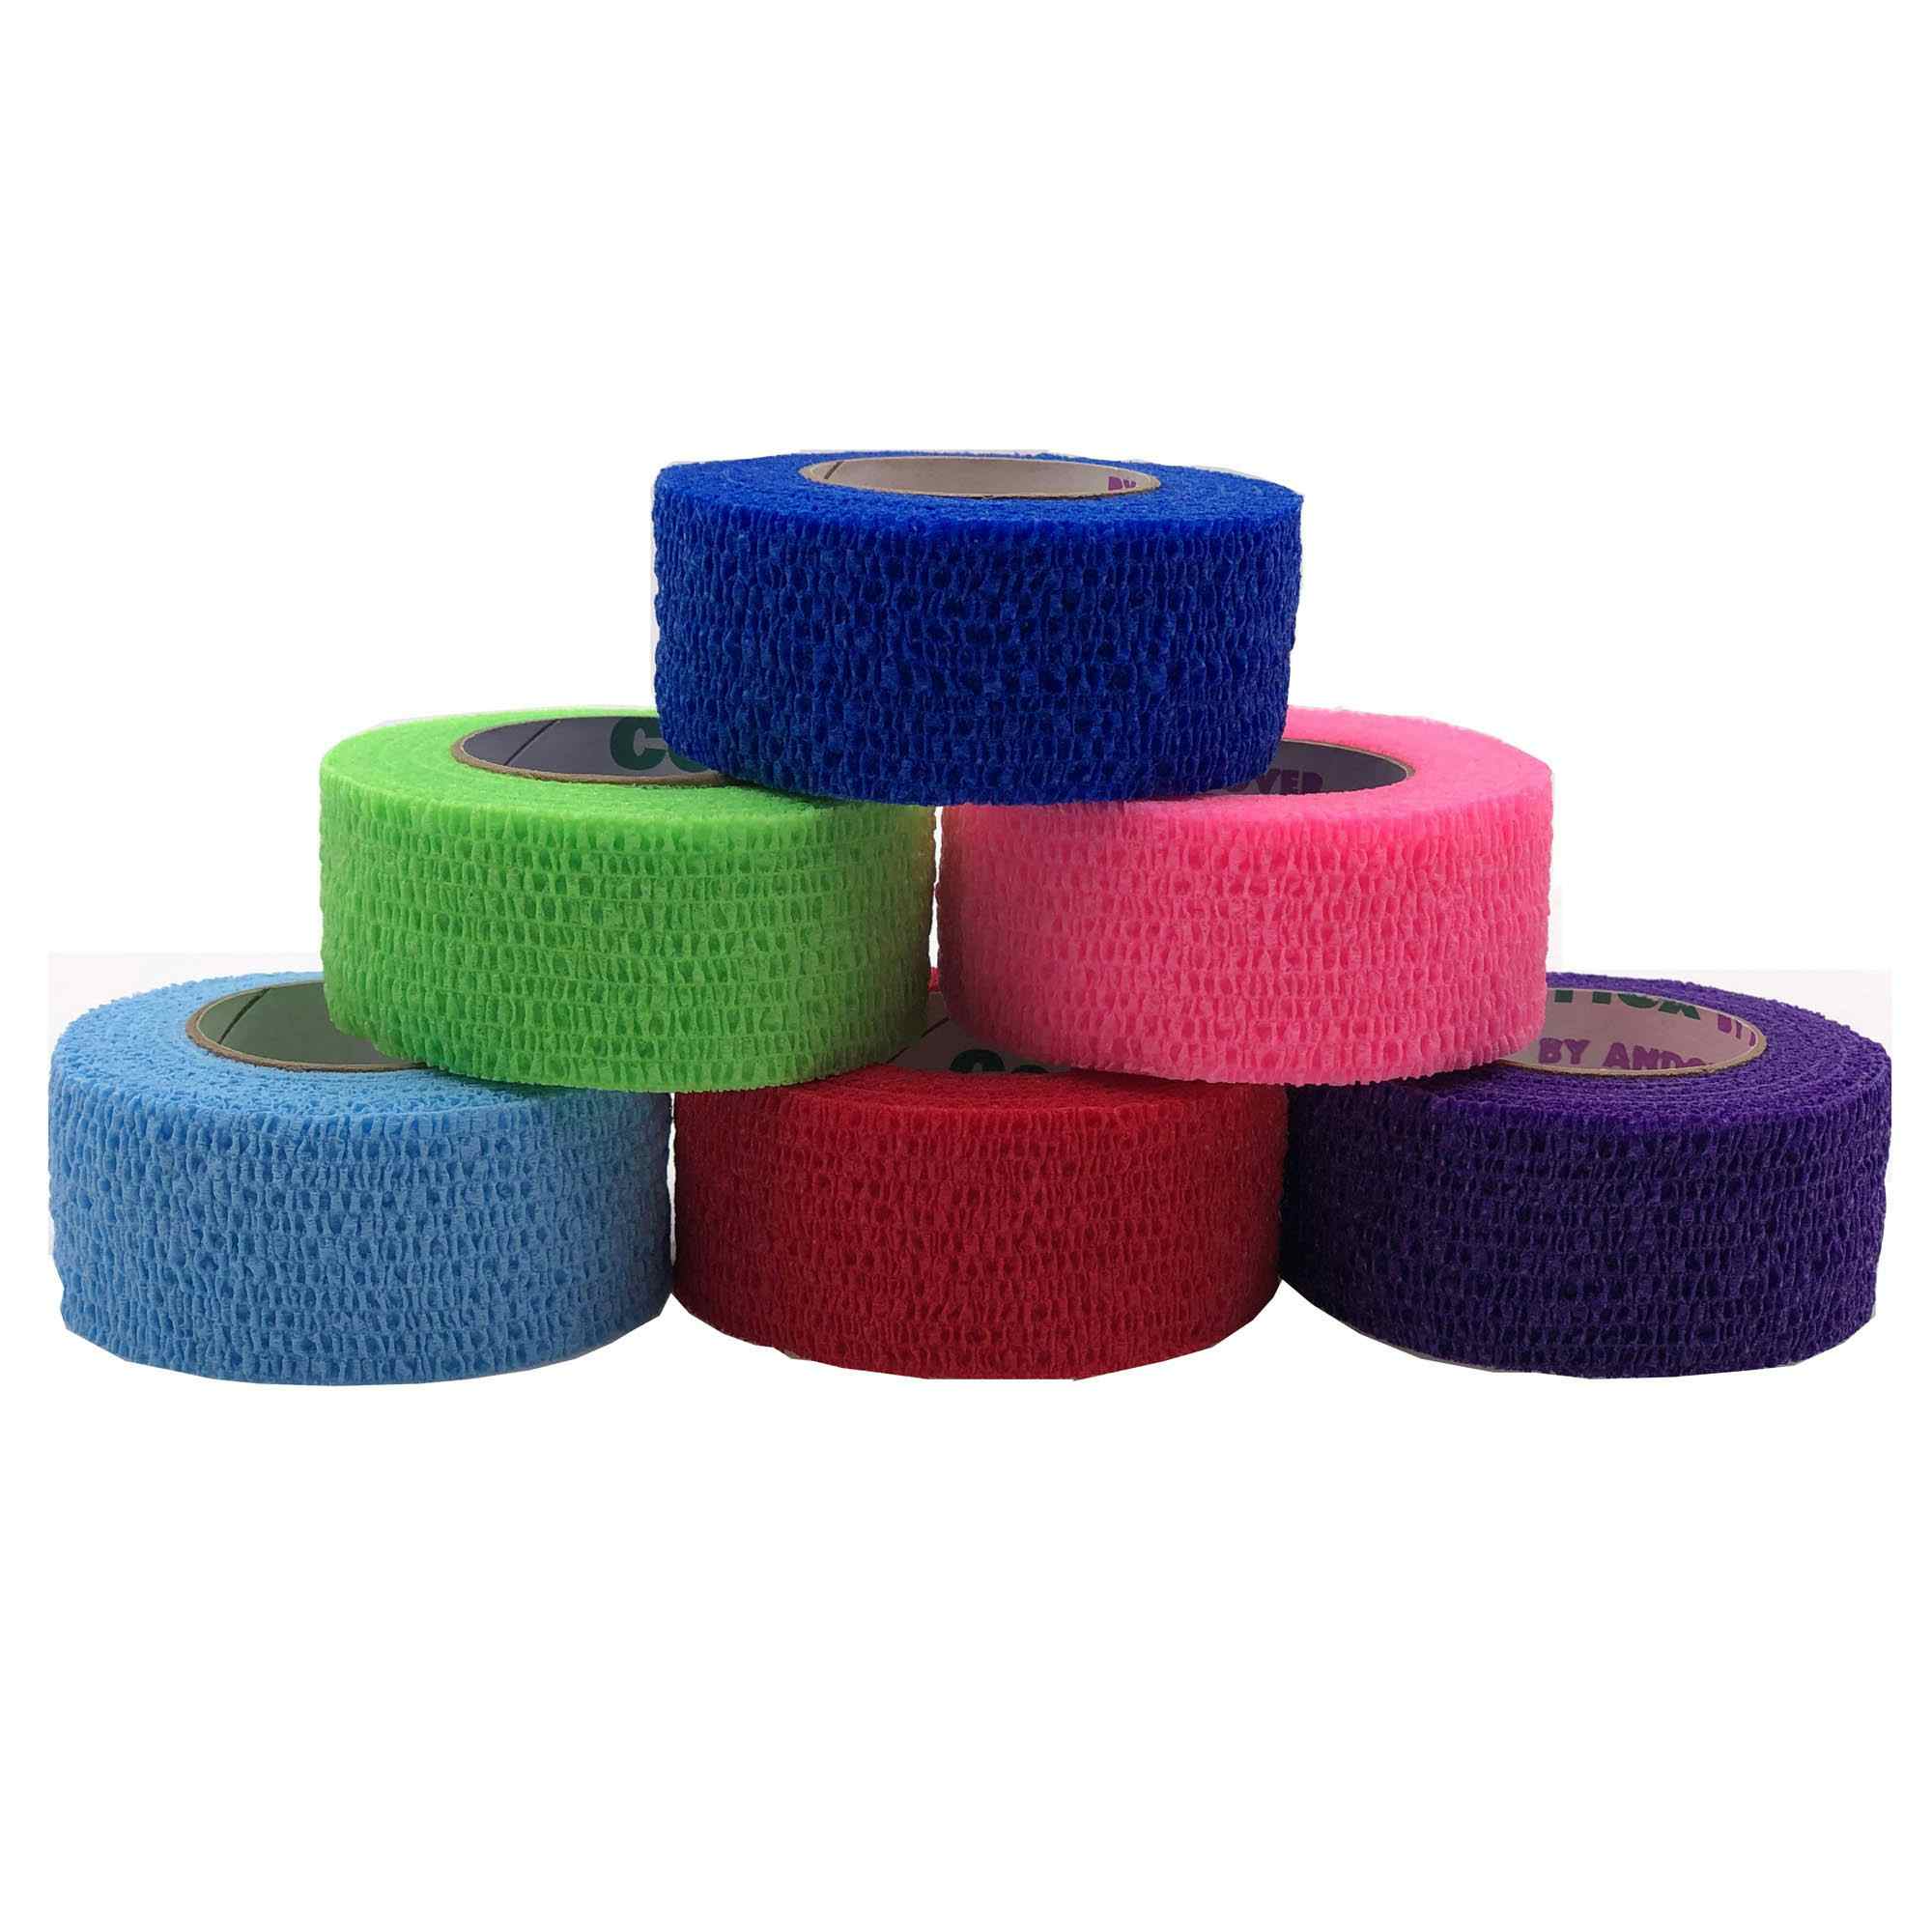 CoFlex Cohesive Bandage, 2" X 5 yd, 3200CP, Assorted Neon Colors - Case of 36